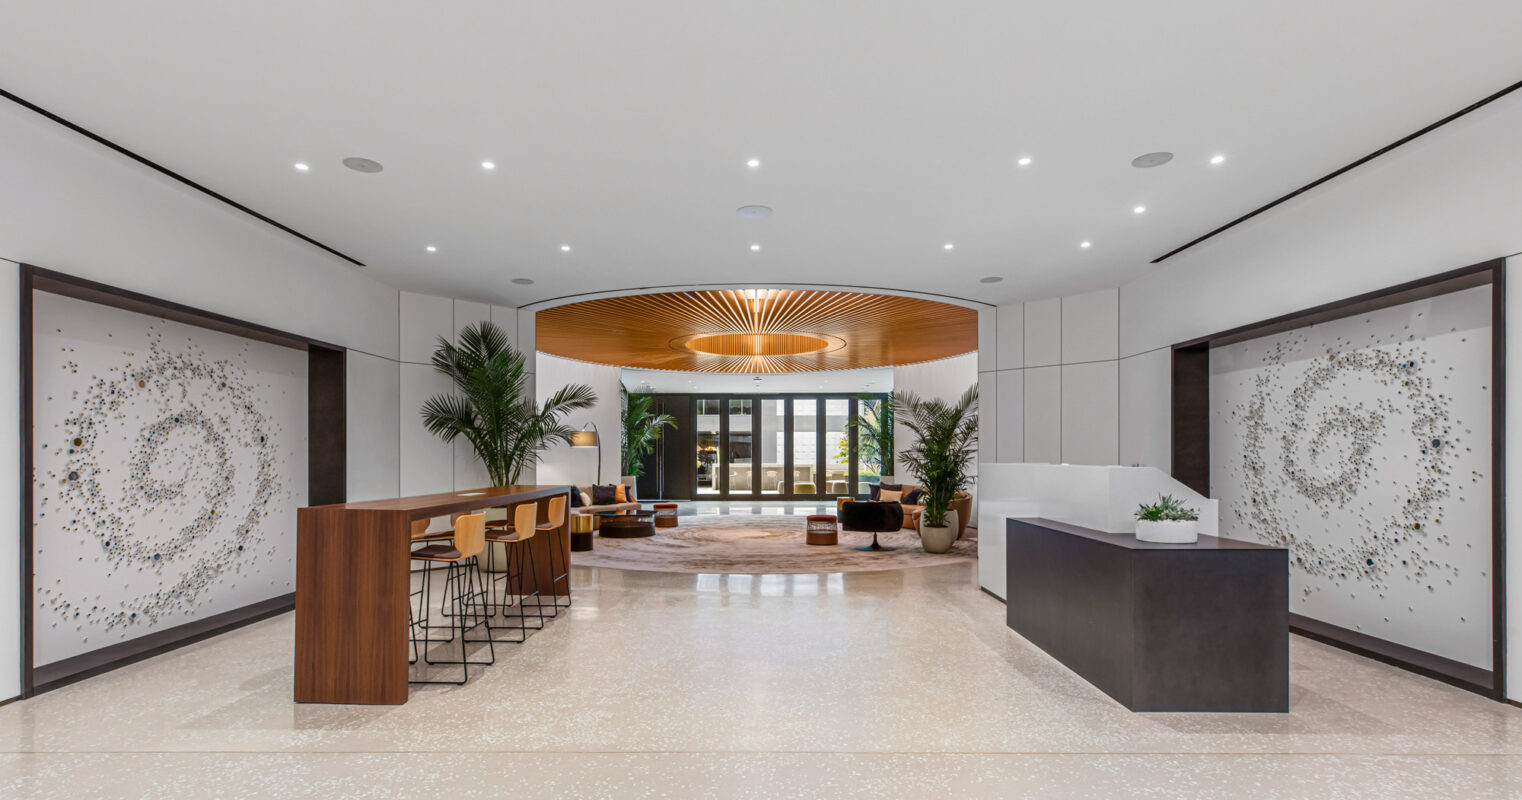 Modern lobby with a sleek marble floor, featuring a wooden curved ceiling accent that guides the eye towards glass doors. Symmetrical decorative panels flank the entrance, with minimalistic furniture subtly enhancing the open and elegant space.